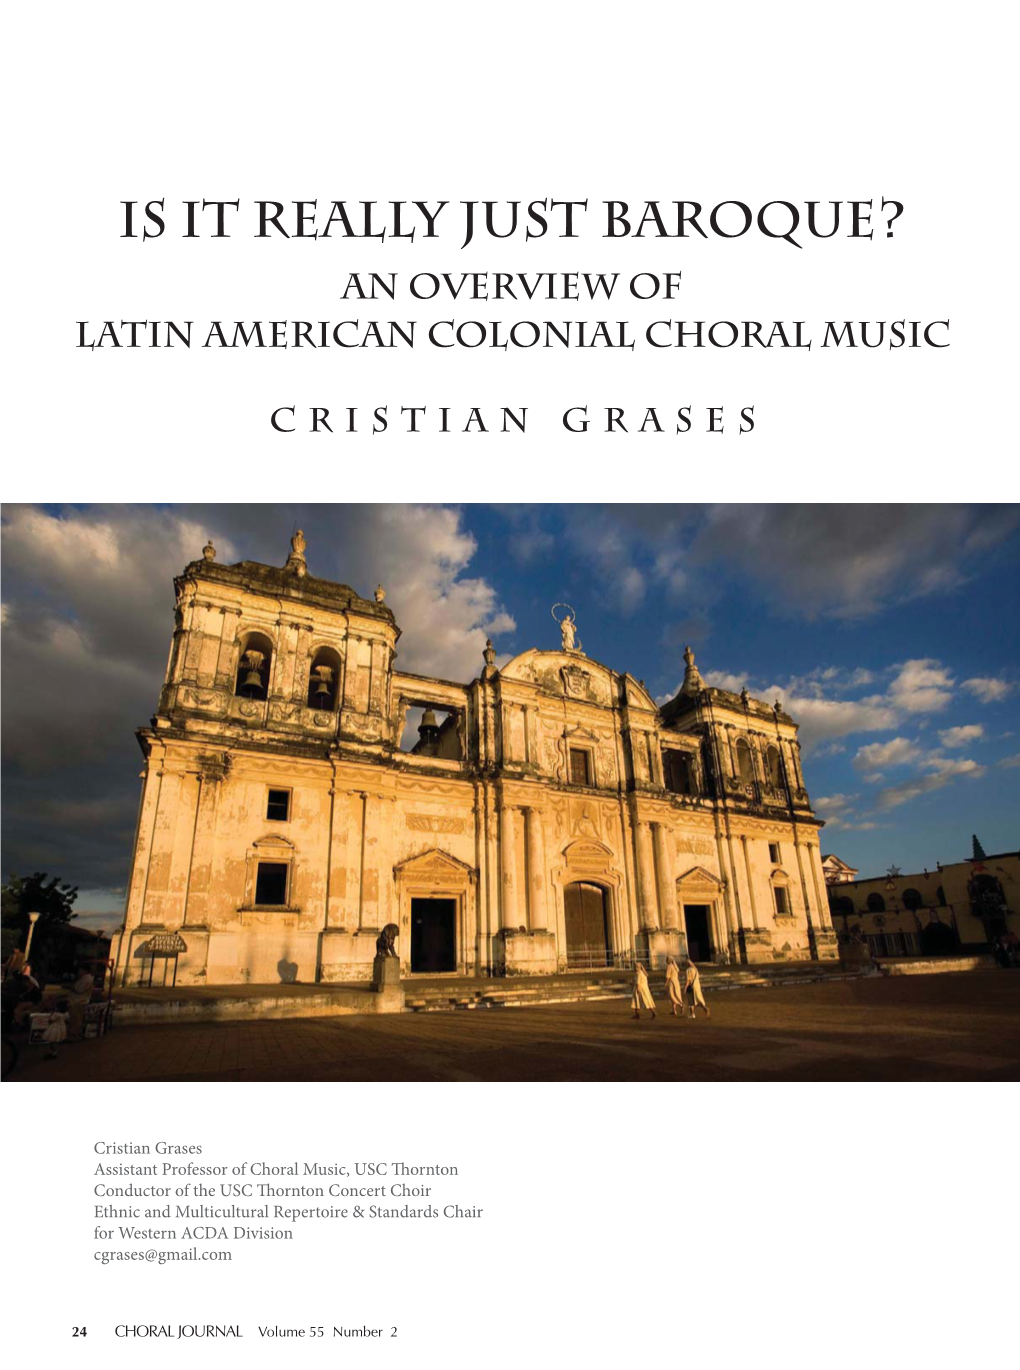 Is It Really Just Baroque? an Overview of Latin American Colonial Choral Music